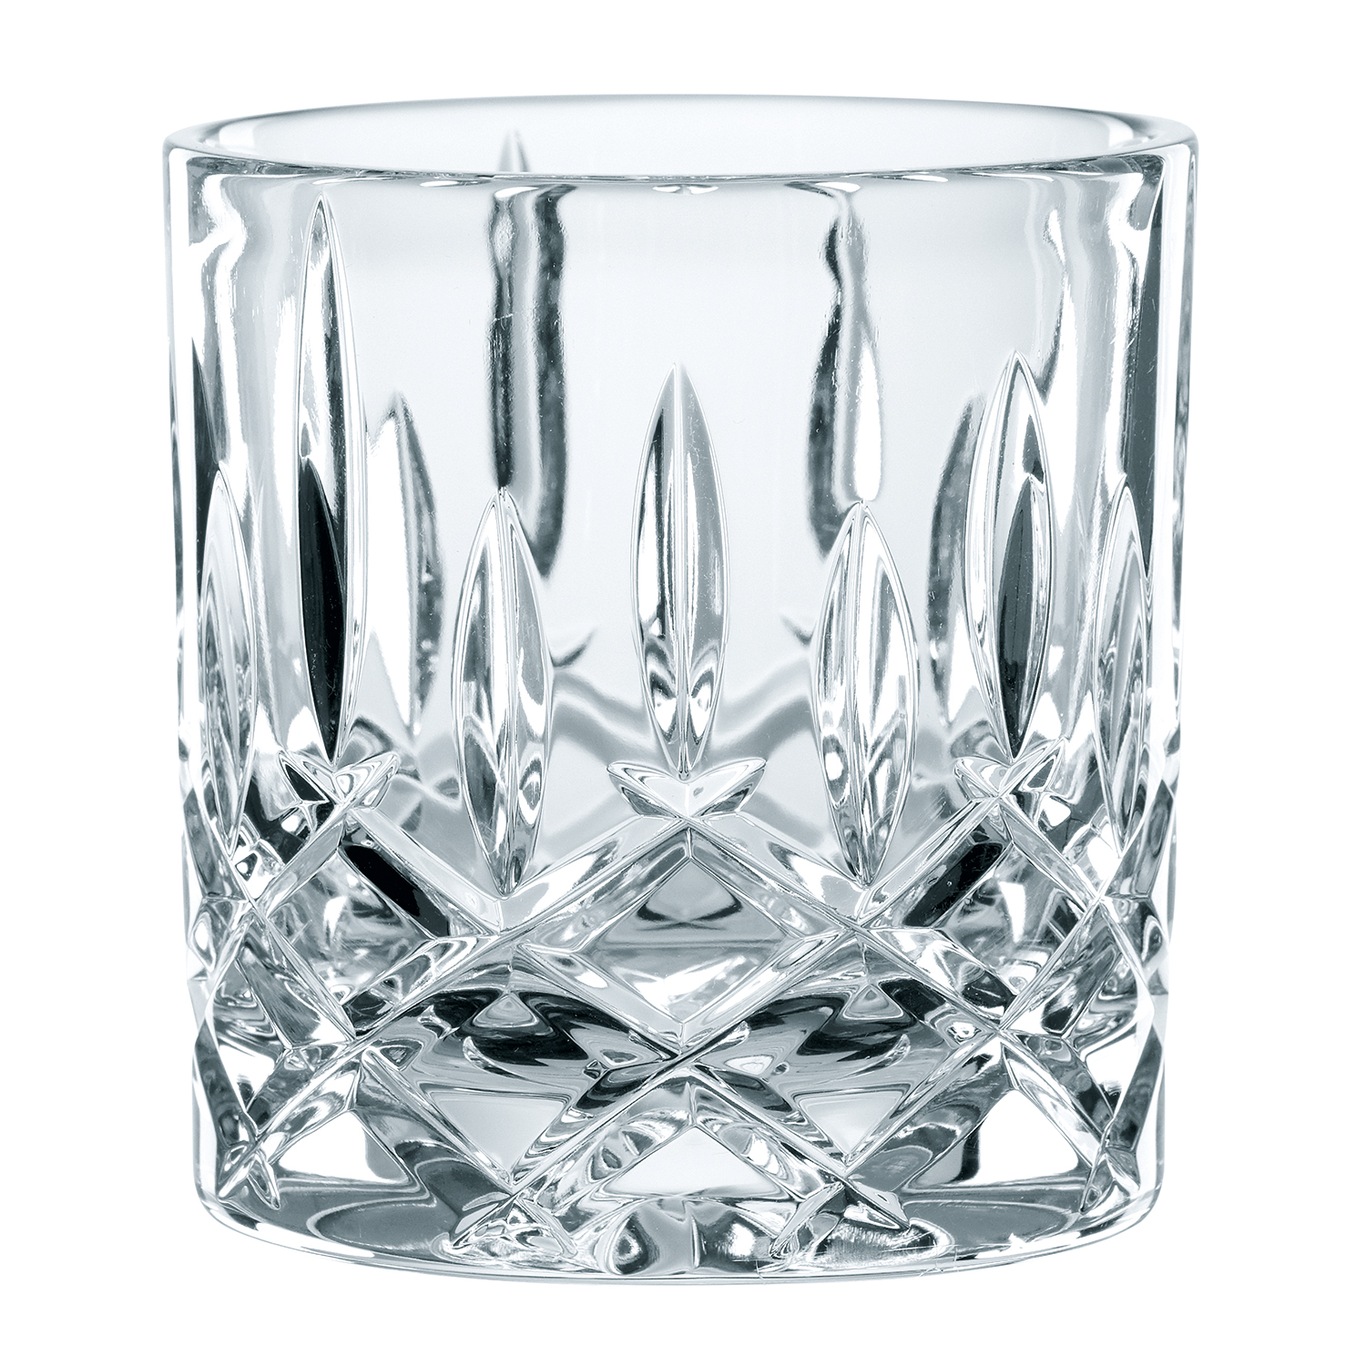 Noblesse Whiskyglass 24,5 cl, 4-pk